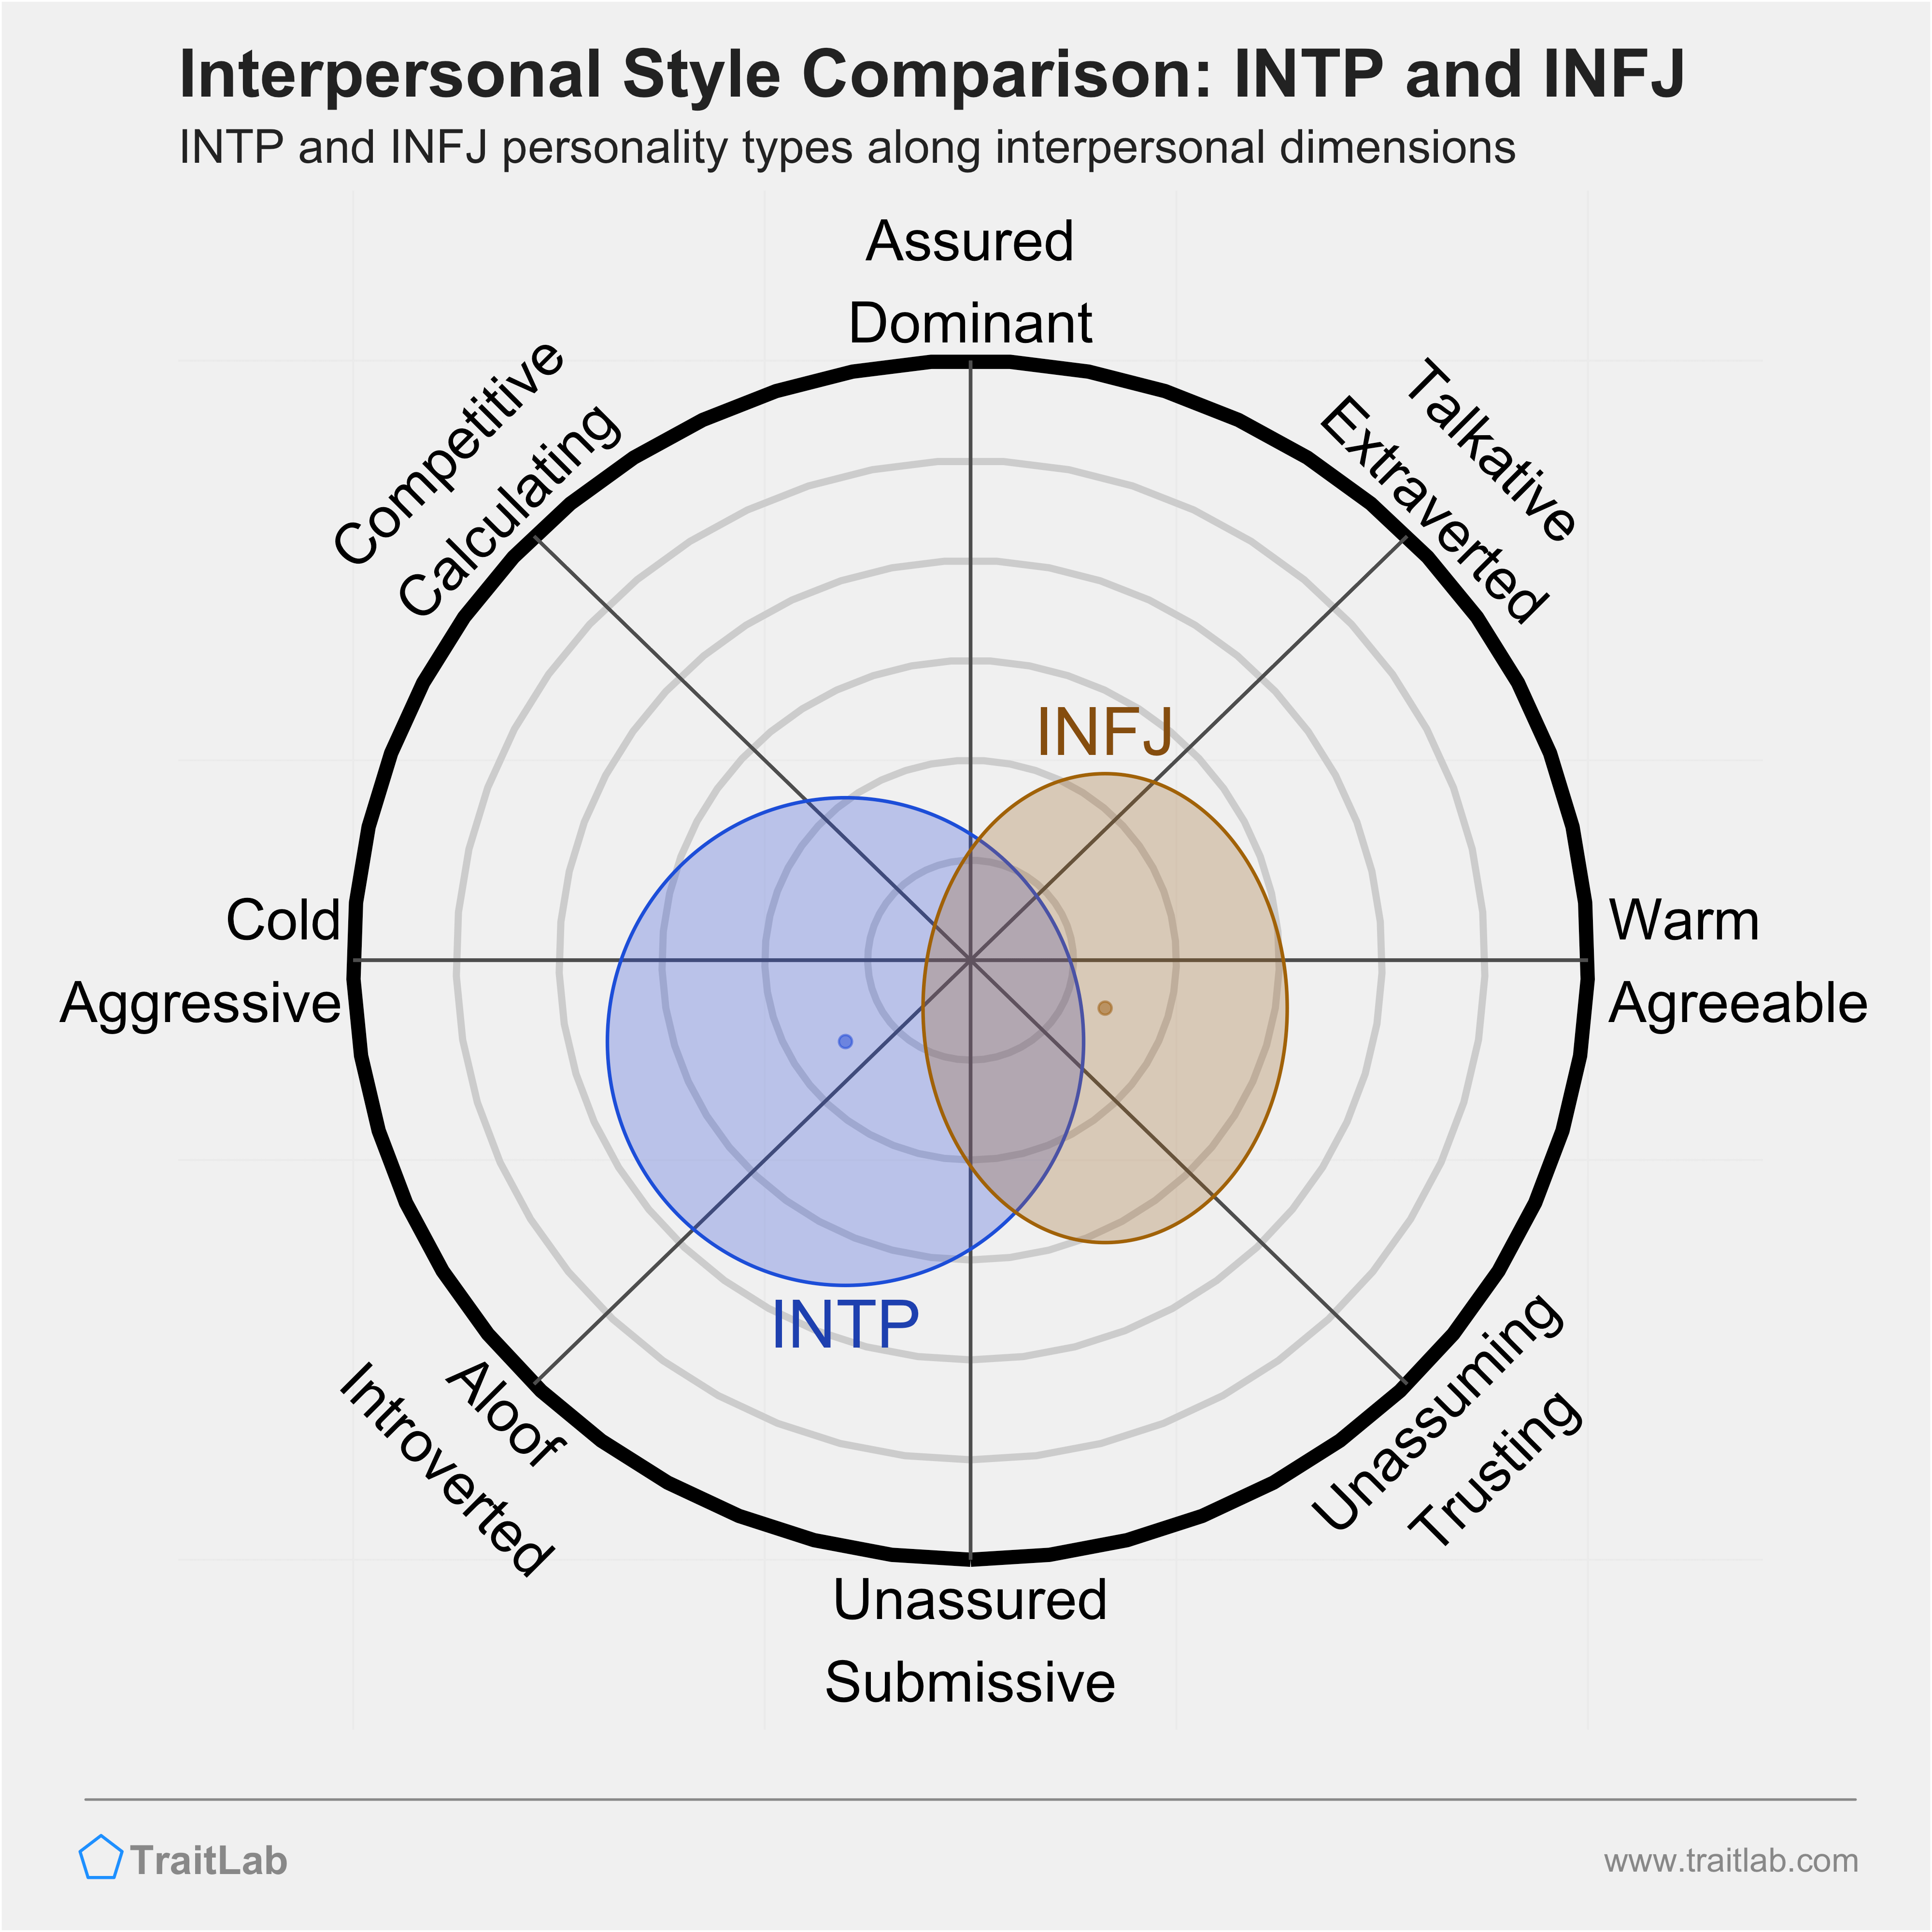 INTP and INFJ comparison across interpersonal dimensions